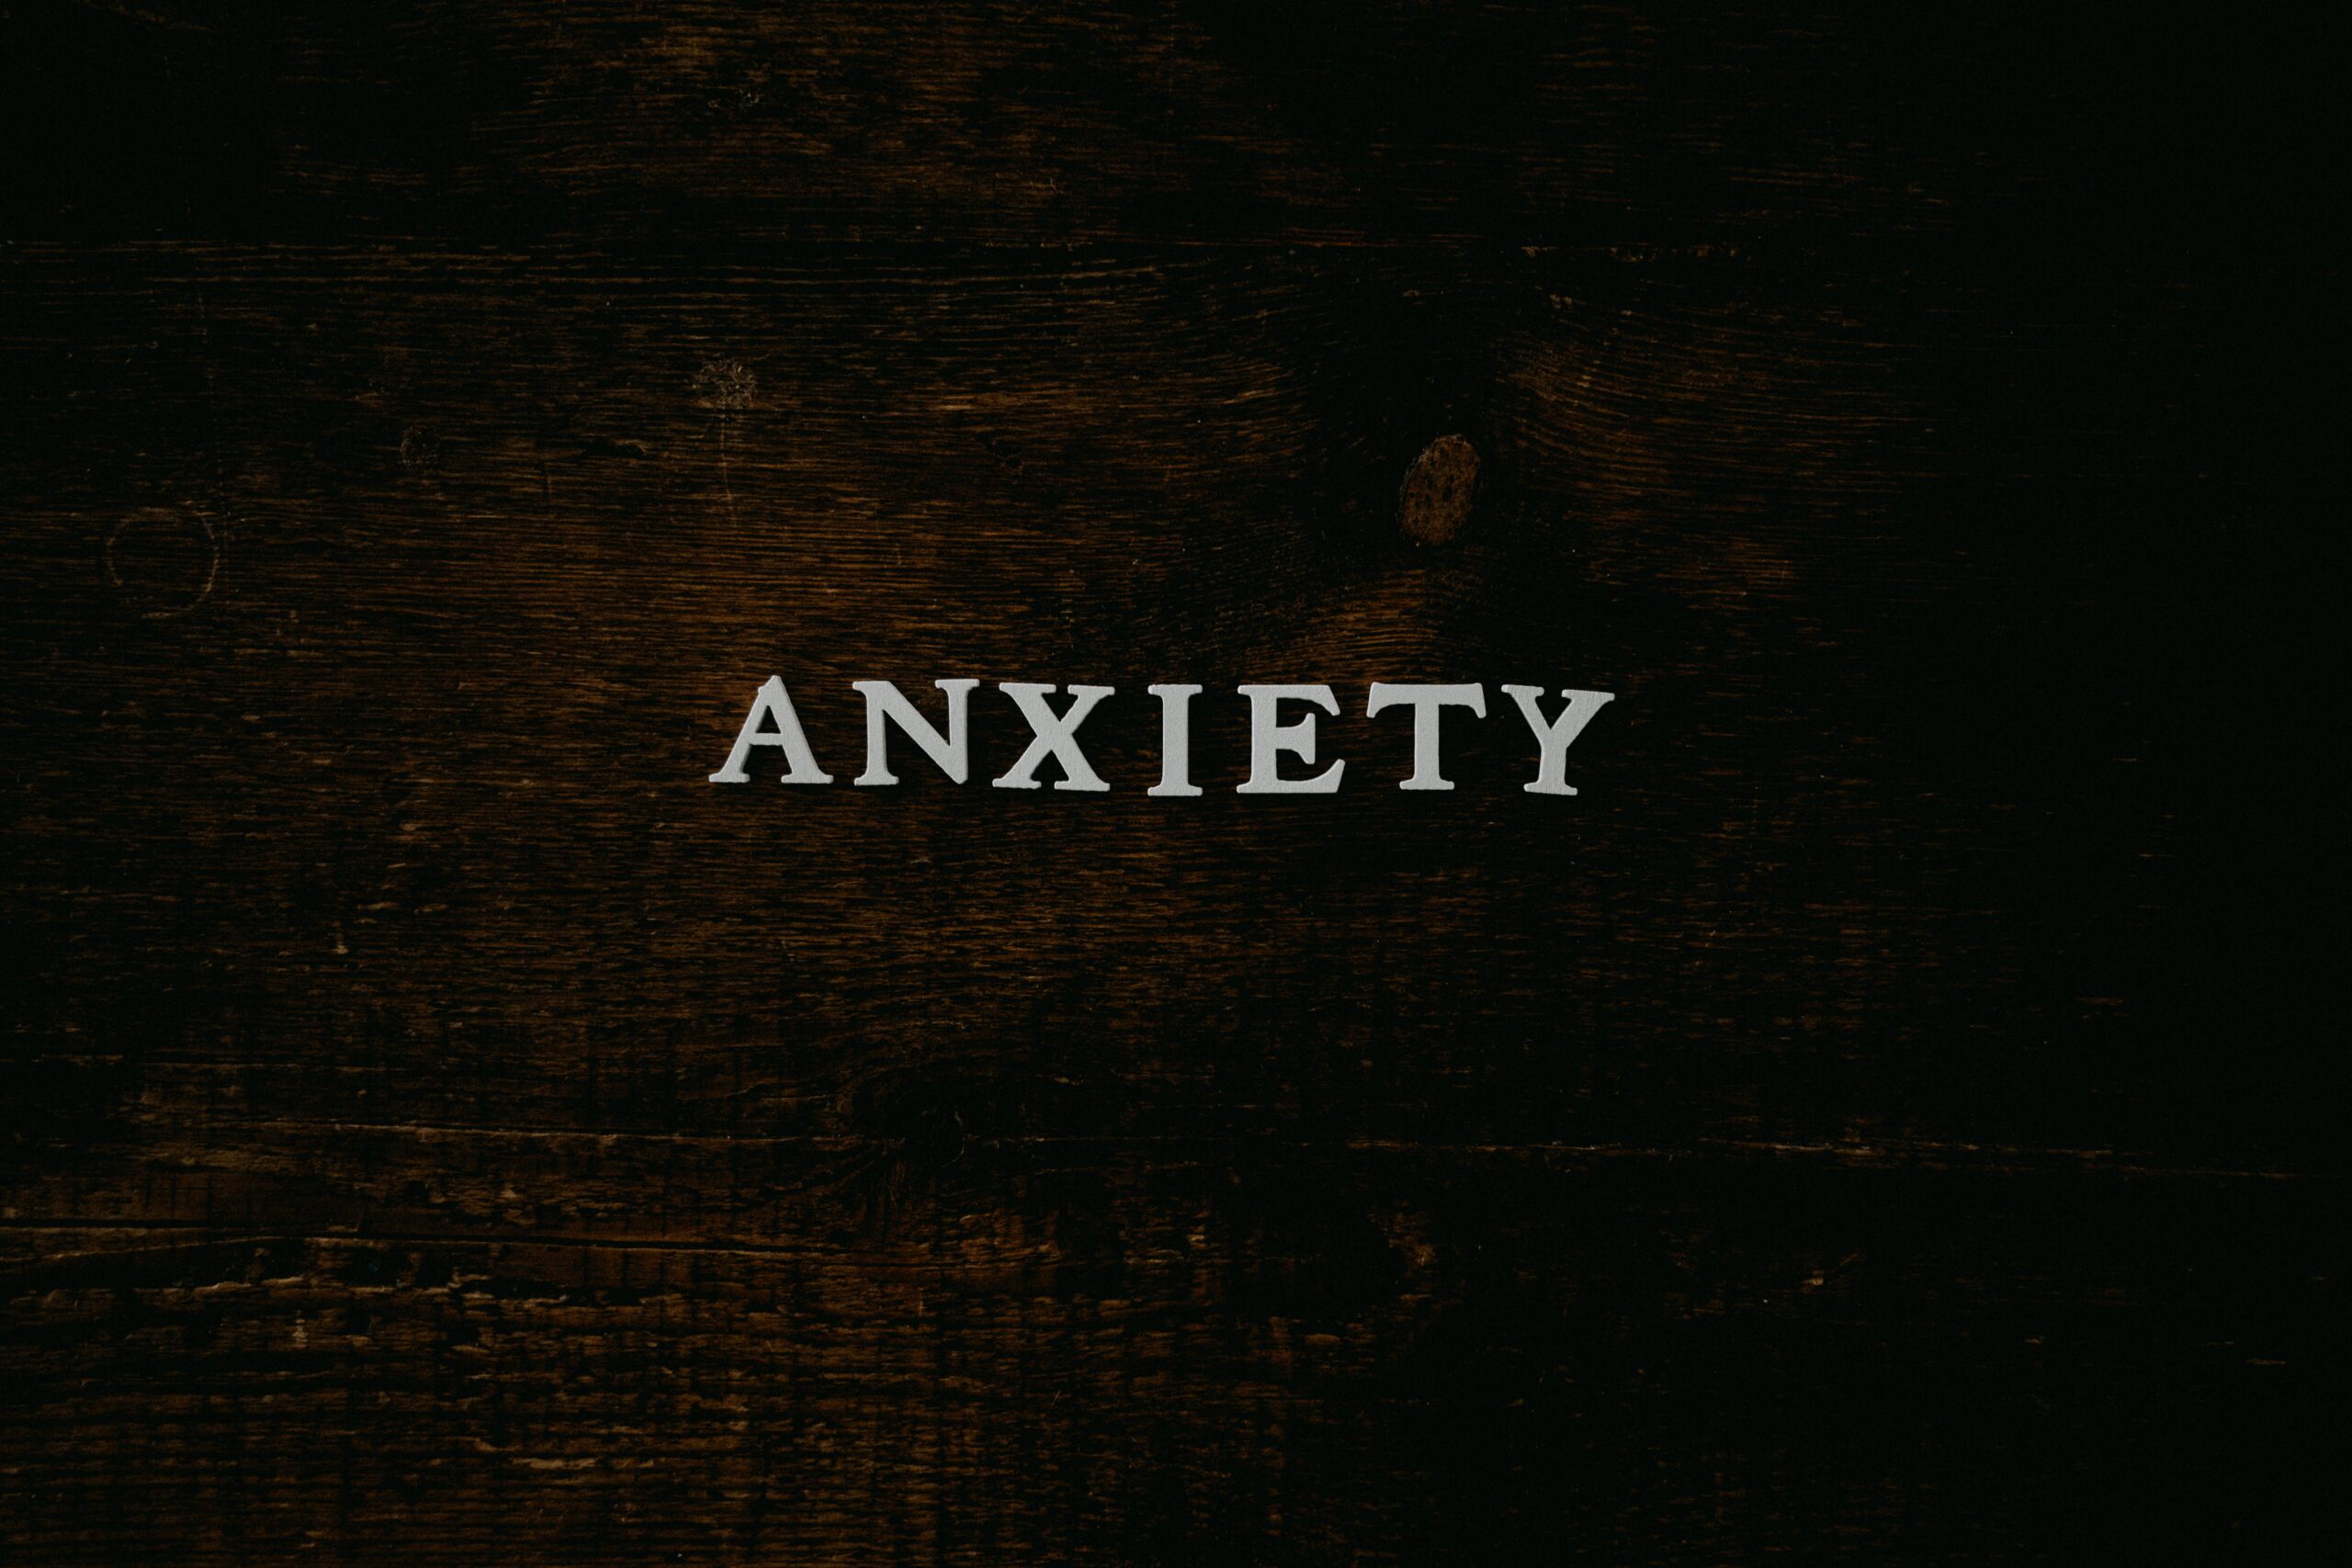 Managing anxiety - black background with the word "anxiety" in white typefont